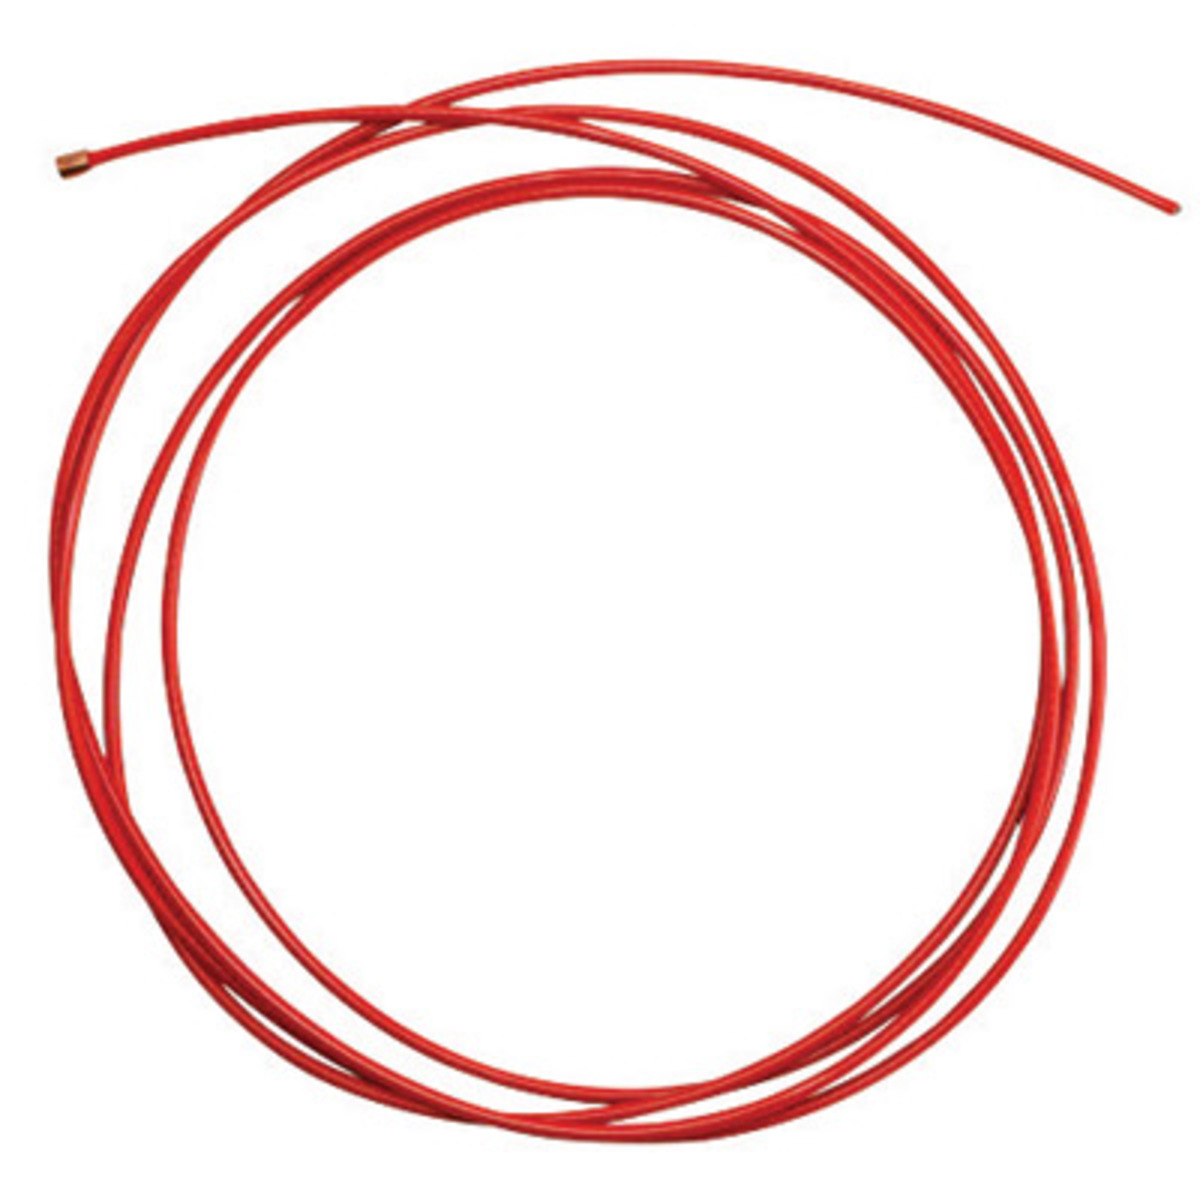 Brady® Red Metal Lockout Cable